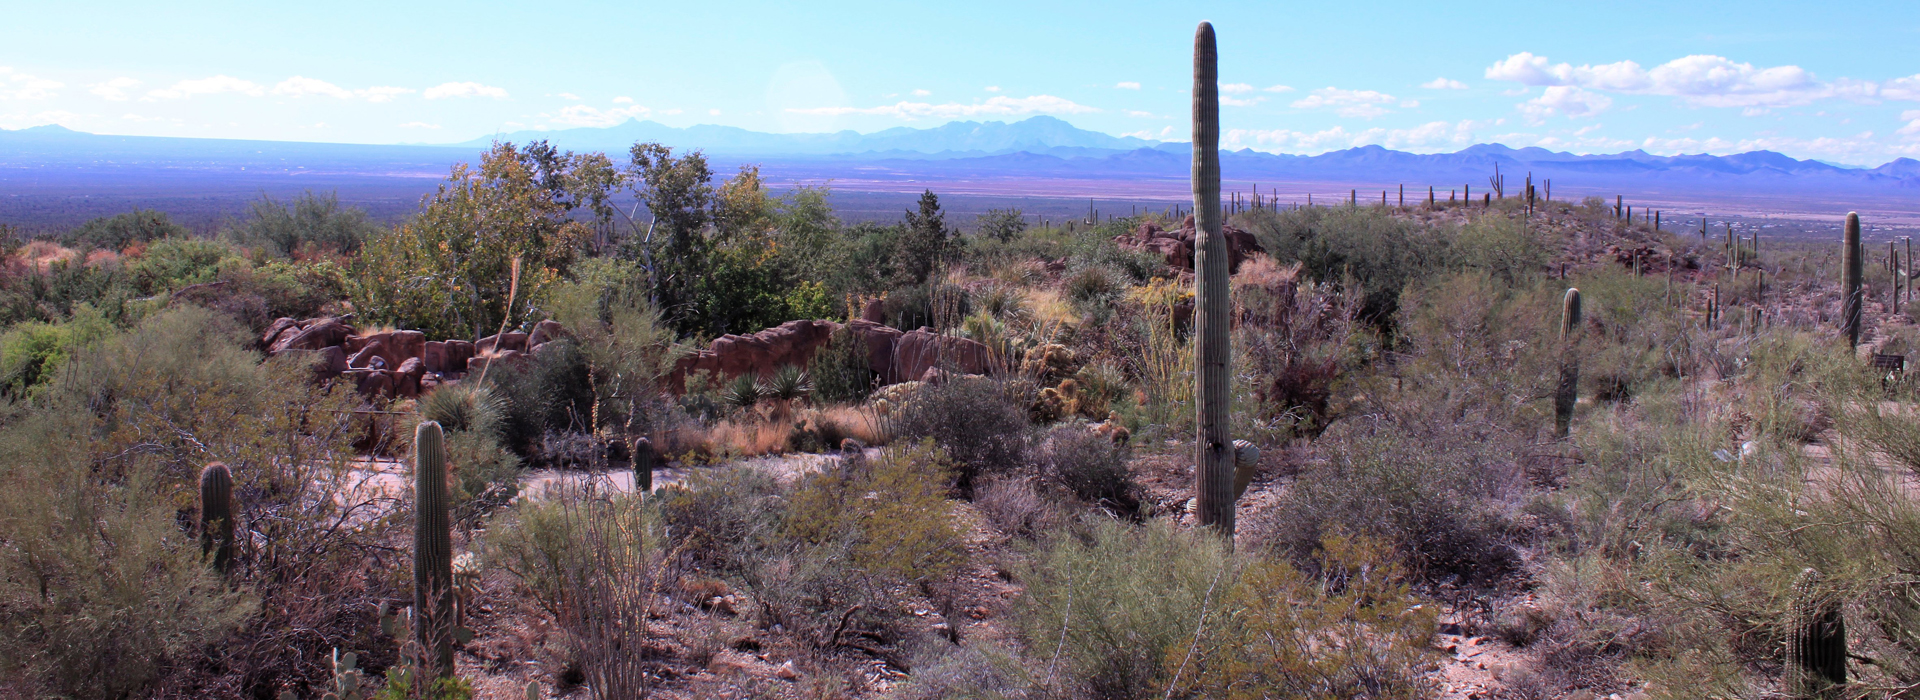 View from the Overlook at the Arizona-Sonora Desert Museum over the Mountain Woodland exhibit